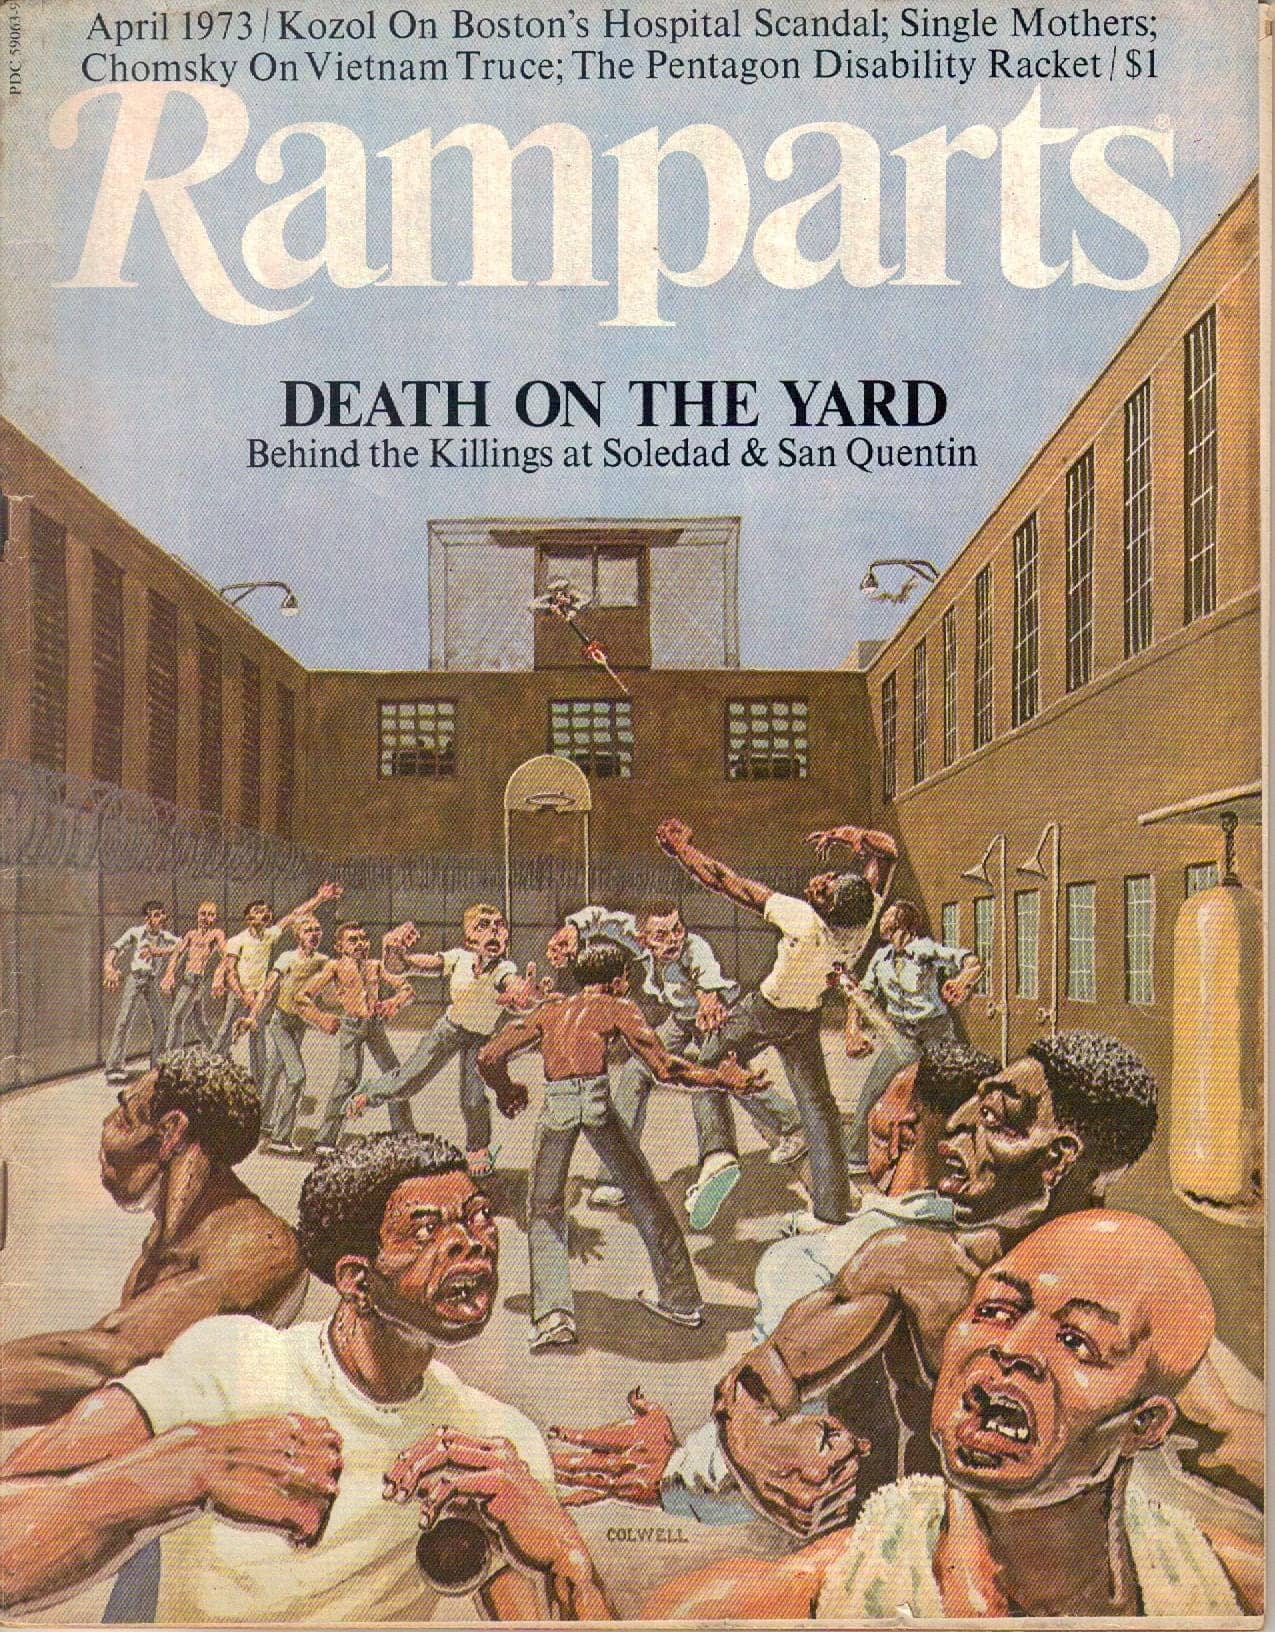 Death-on-the-Yard-Behind-the-Killings-at-Soledad-San-Quentin’-cover-Ramparts-magazine-0473, Soledad uncensored: Racism and the hyper-policing of Black bodies, Part 1, Abolition Now! 